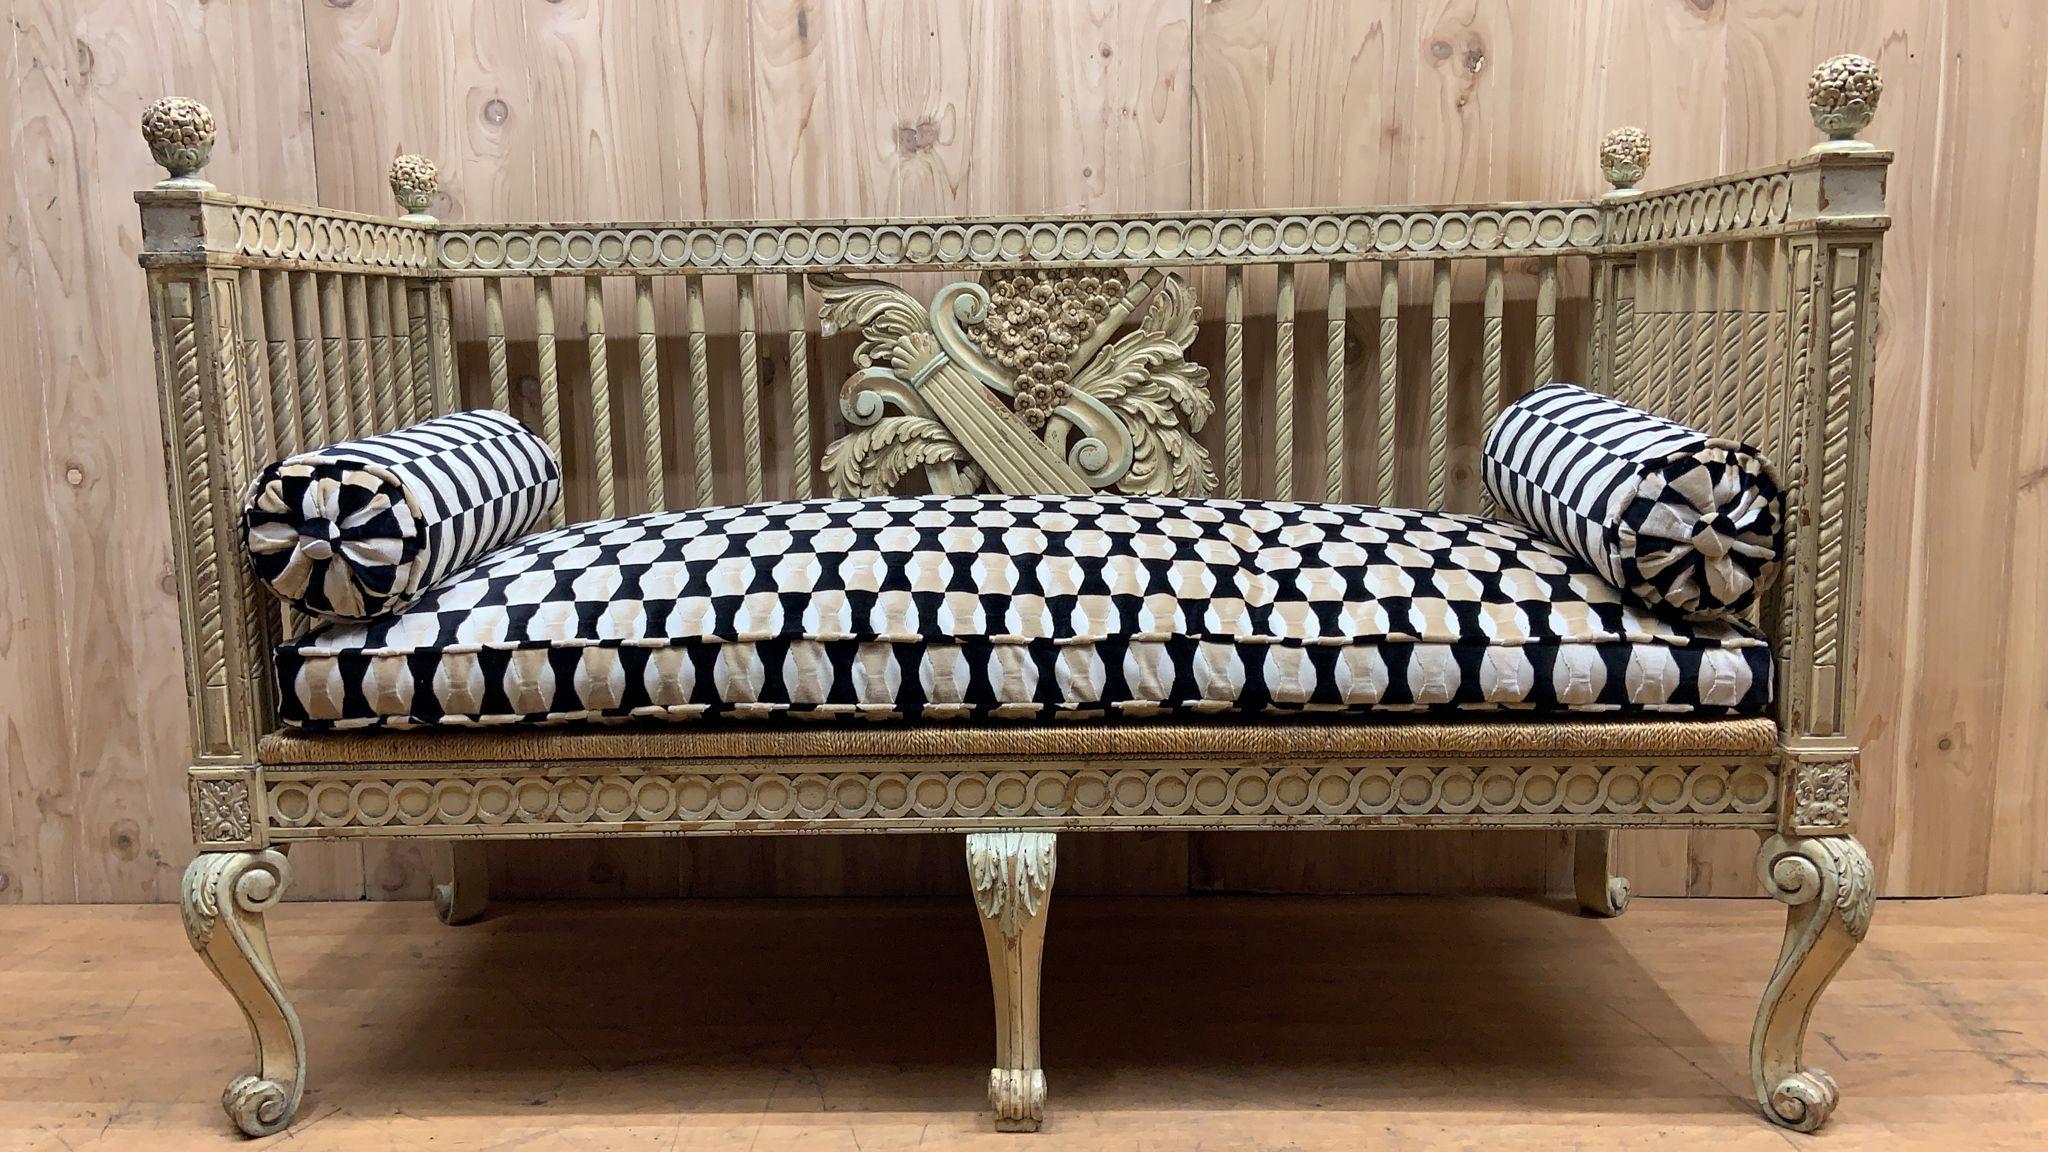 Vintage Italian Neoclassical Carved Settee Bench

Exquisite vintage Italian neoclassical painted settee. Stunning details include a carved musical motif of a lyre and trumpet on the front back and outside back, carved legs and finials. Large and